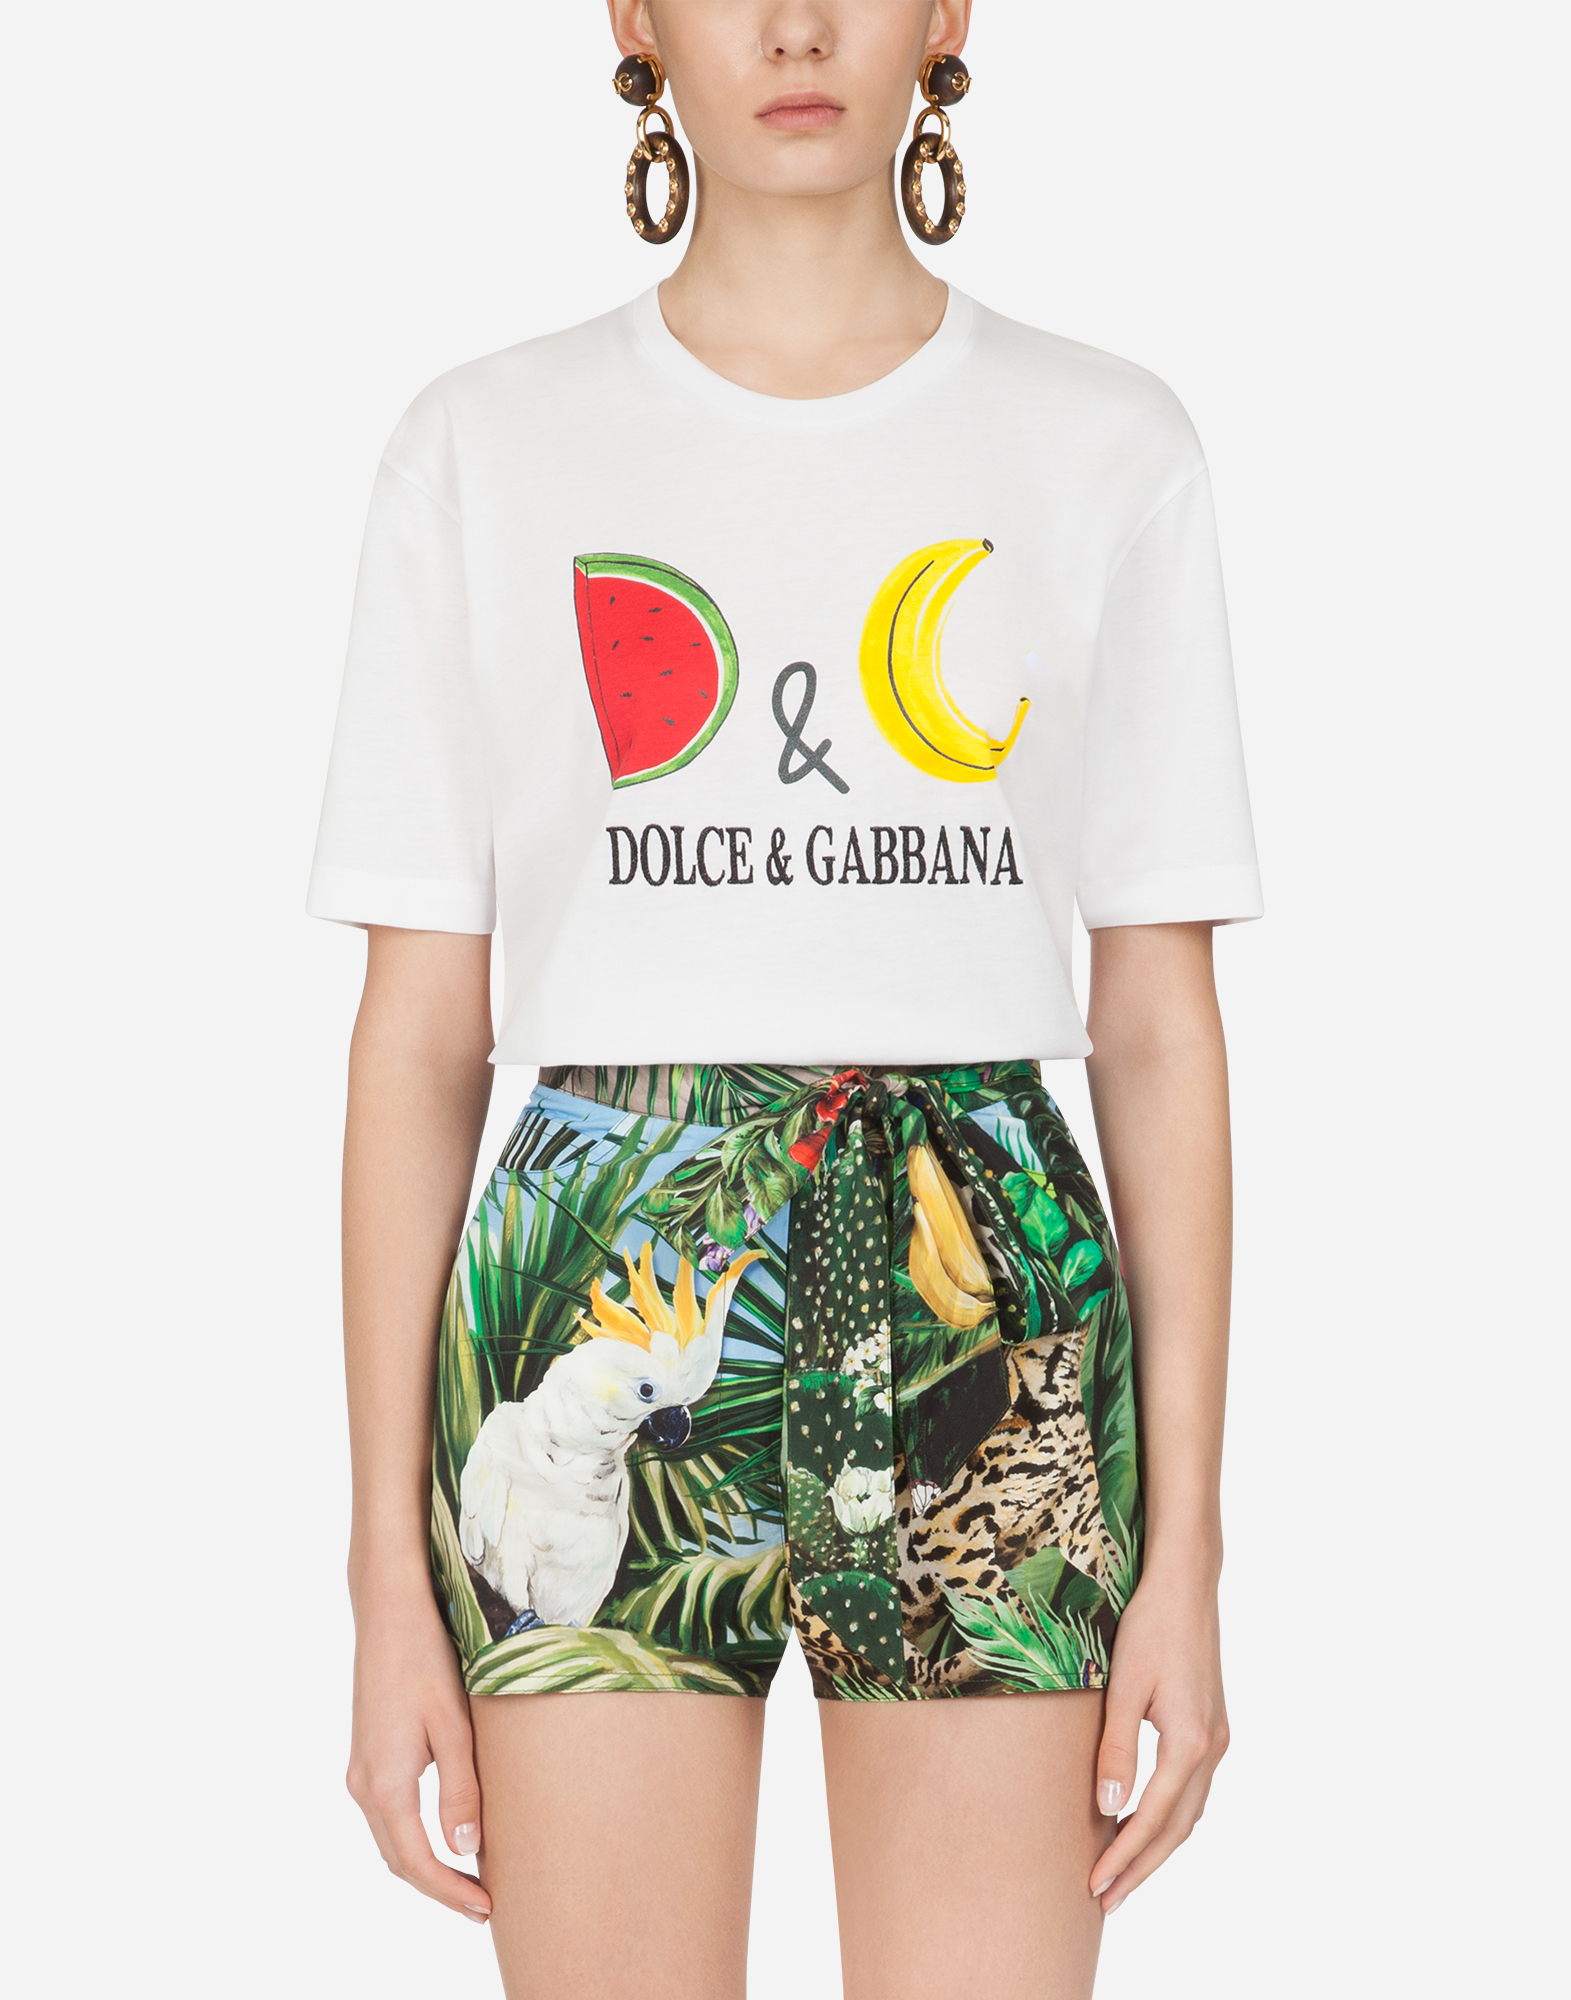 DOLCE & GABBANA JERSEY T-SHIRT WITH D&G PRINT WITH EMBROIDERY